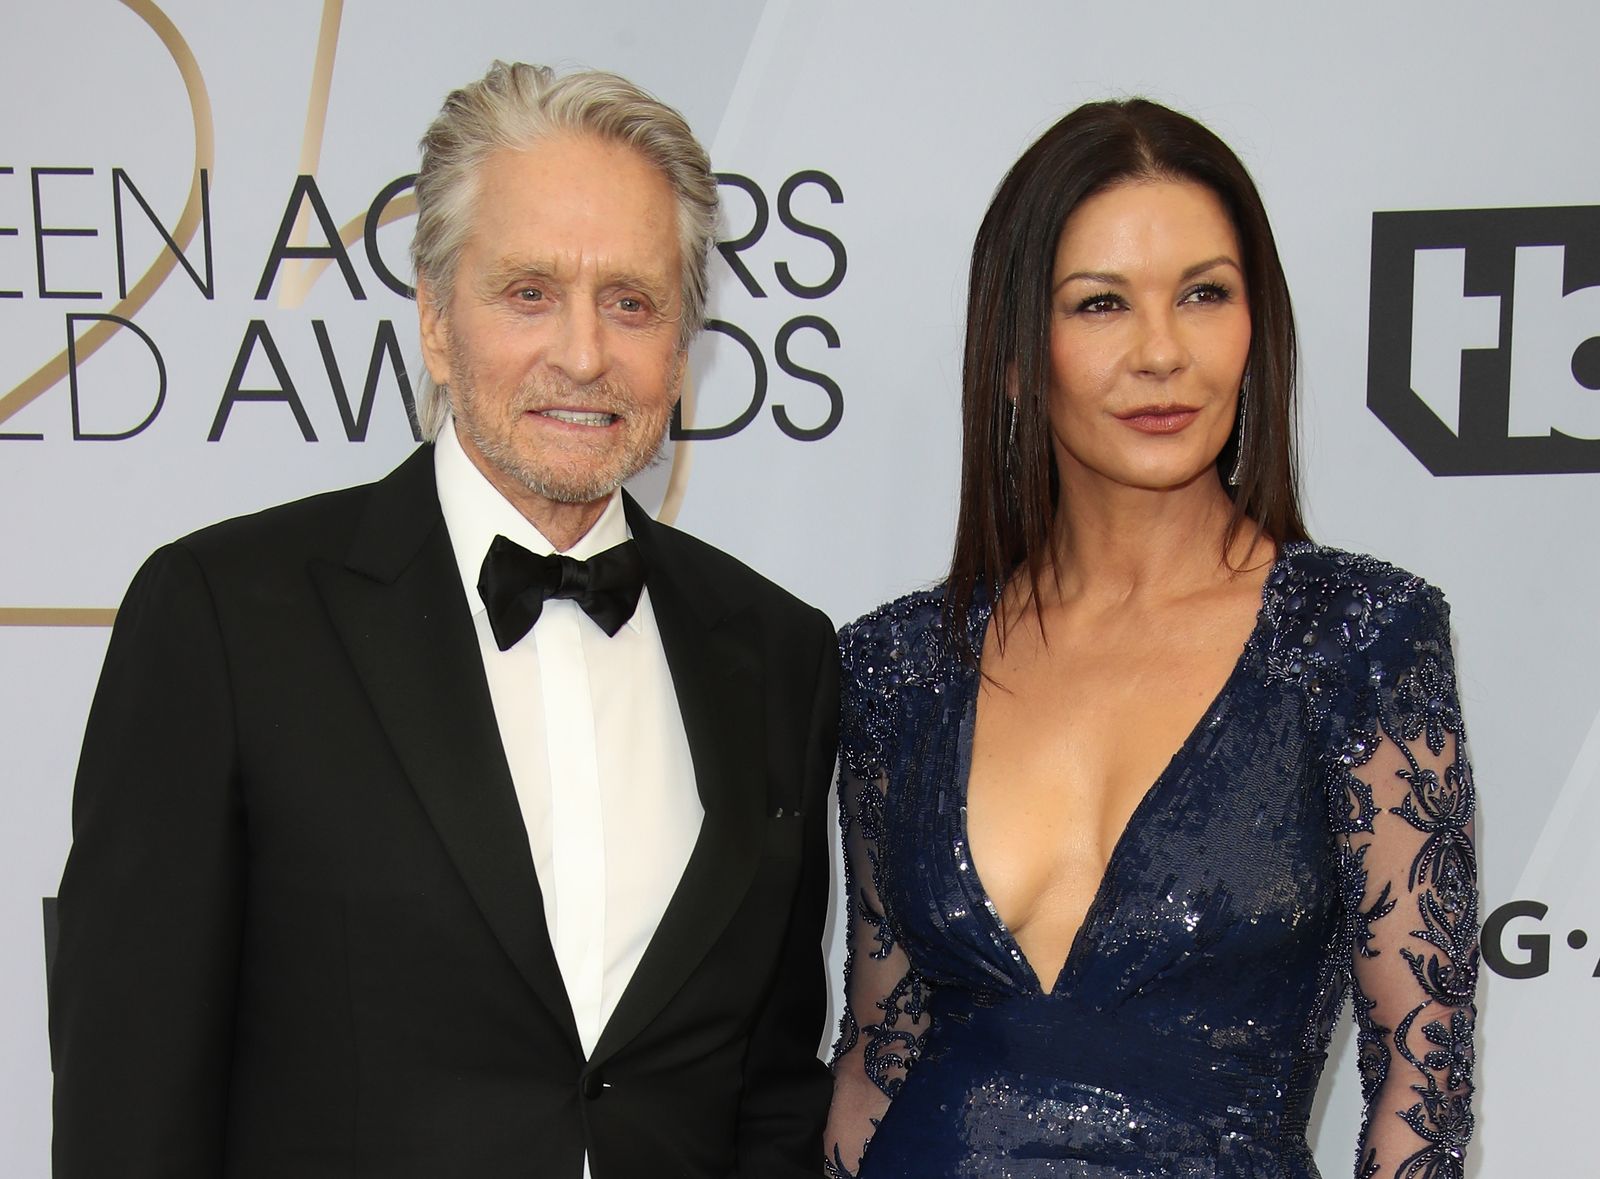 Michael Douglas and Catherine Zeta-Jones at the 25th Annual Screen Actors Guild Awards at The Shrine Auditorium on January 27, 2019. | Photo: Getty Images